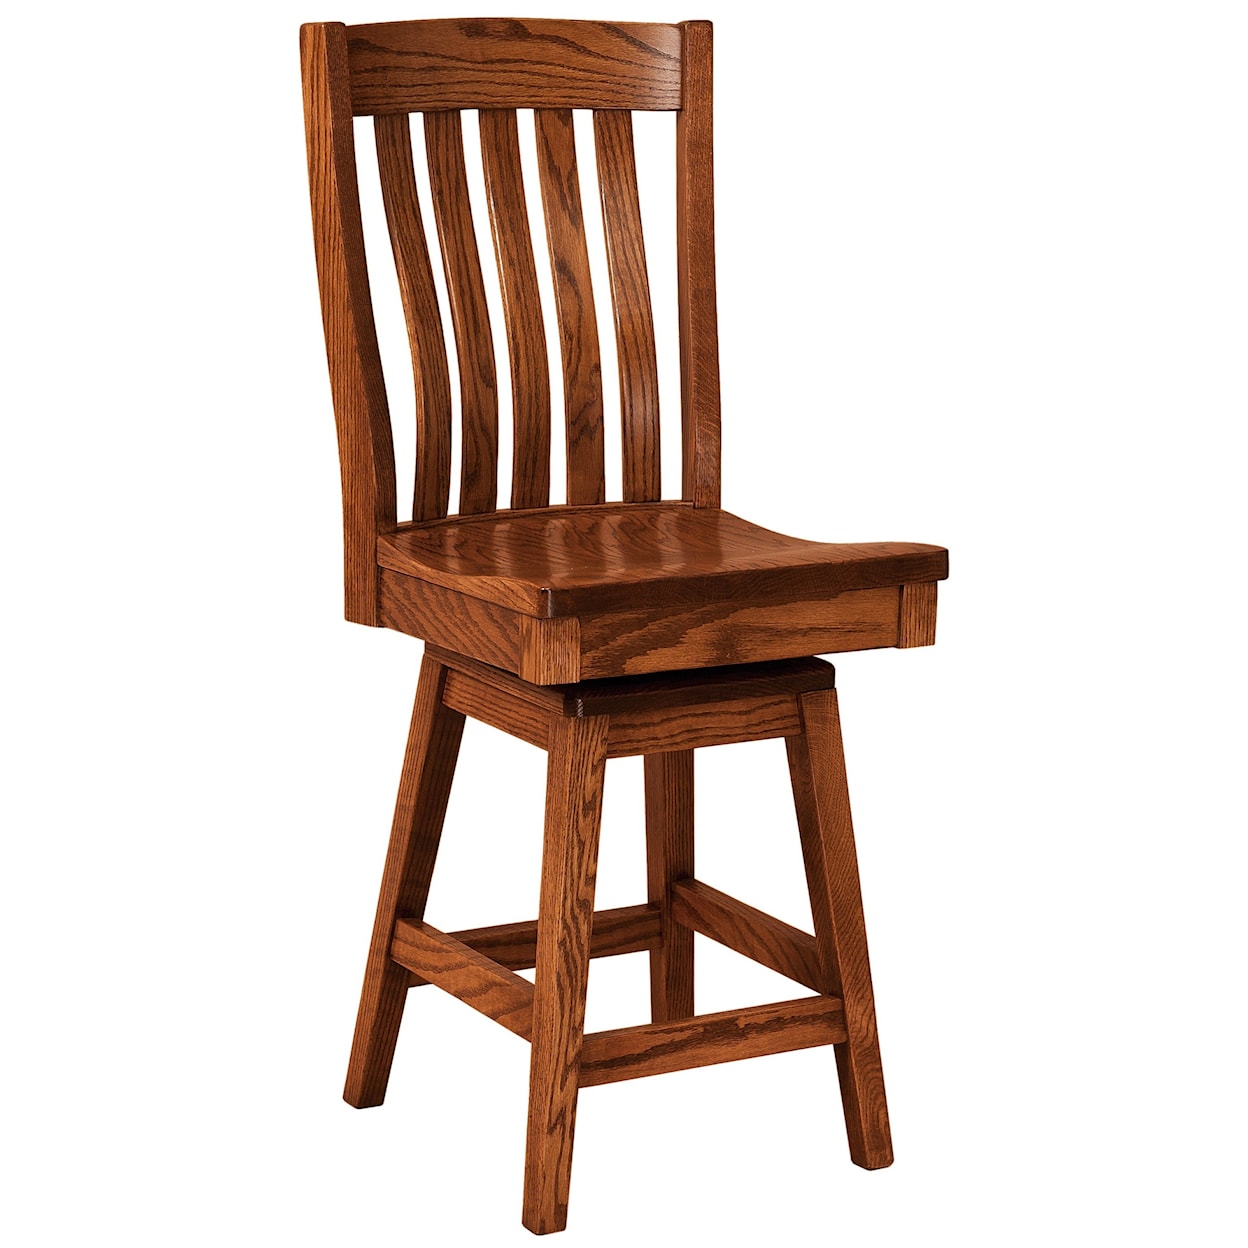 F&N Woodworking Houghton Swivel Counter Height Stool - Leather Seat